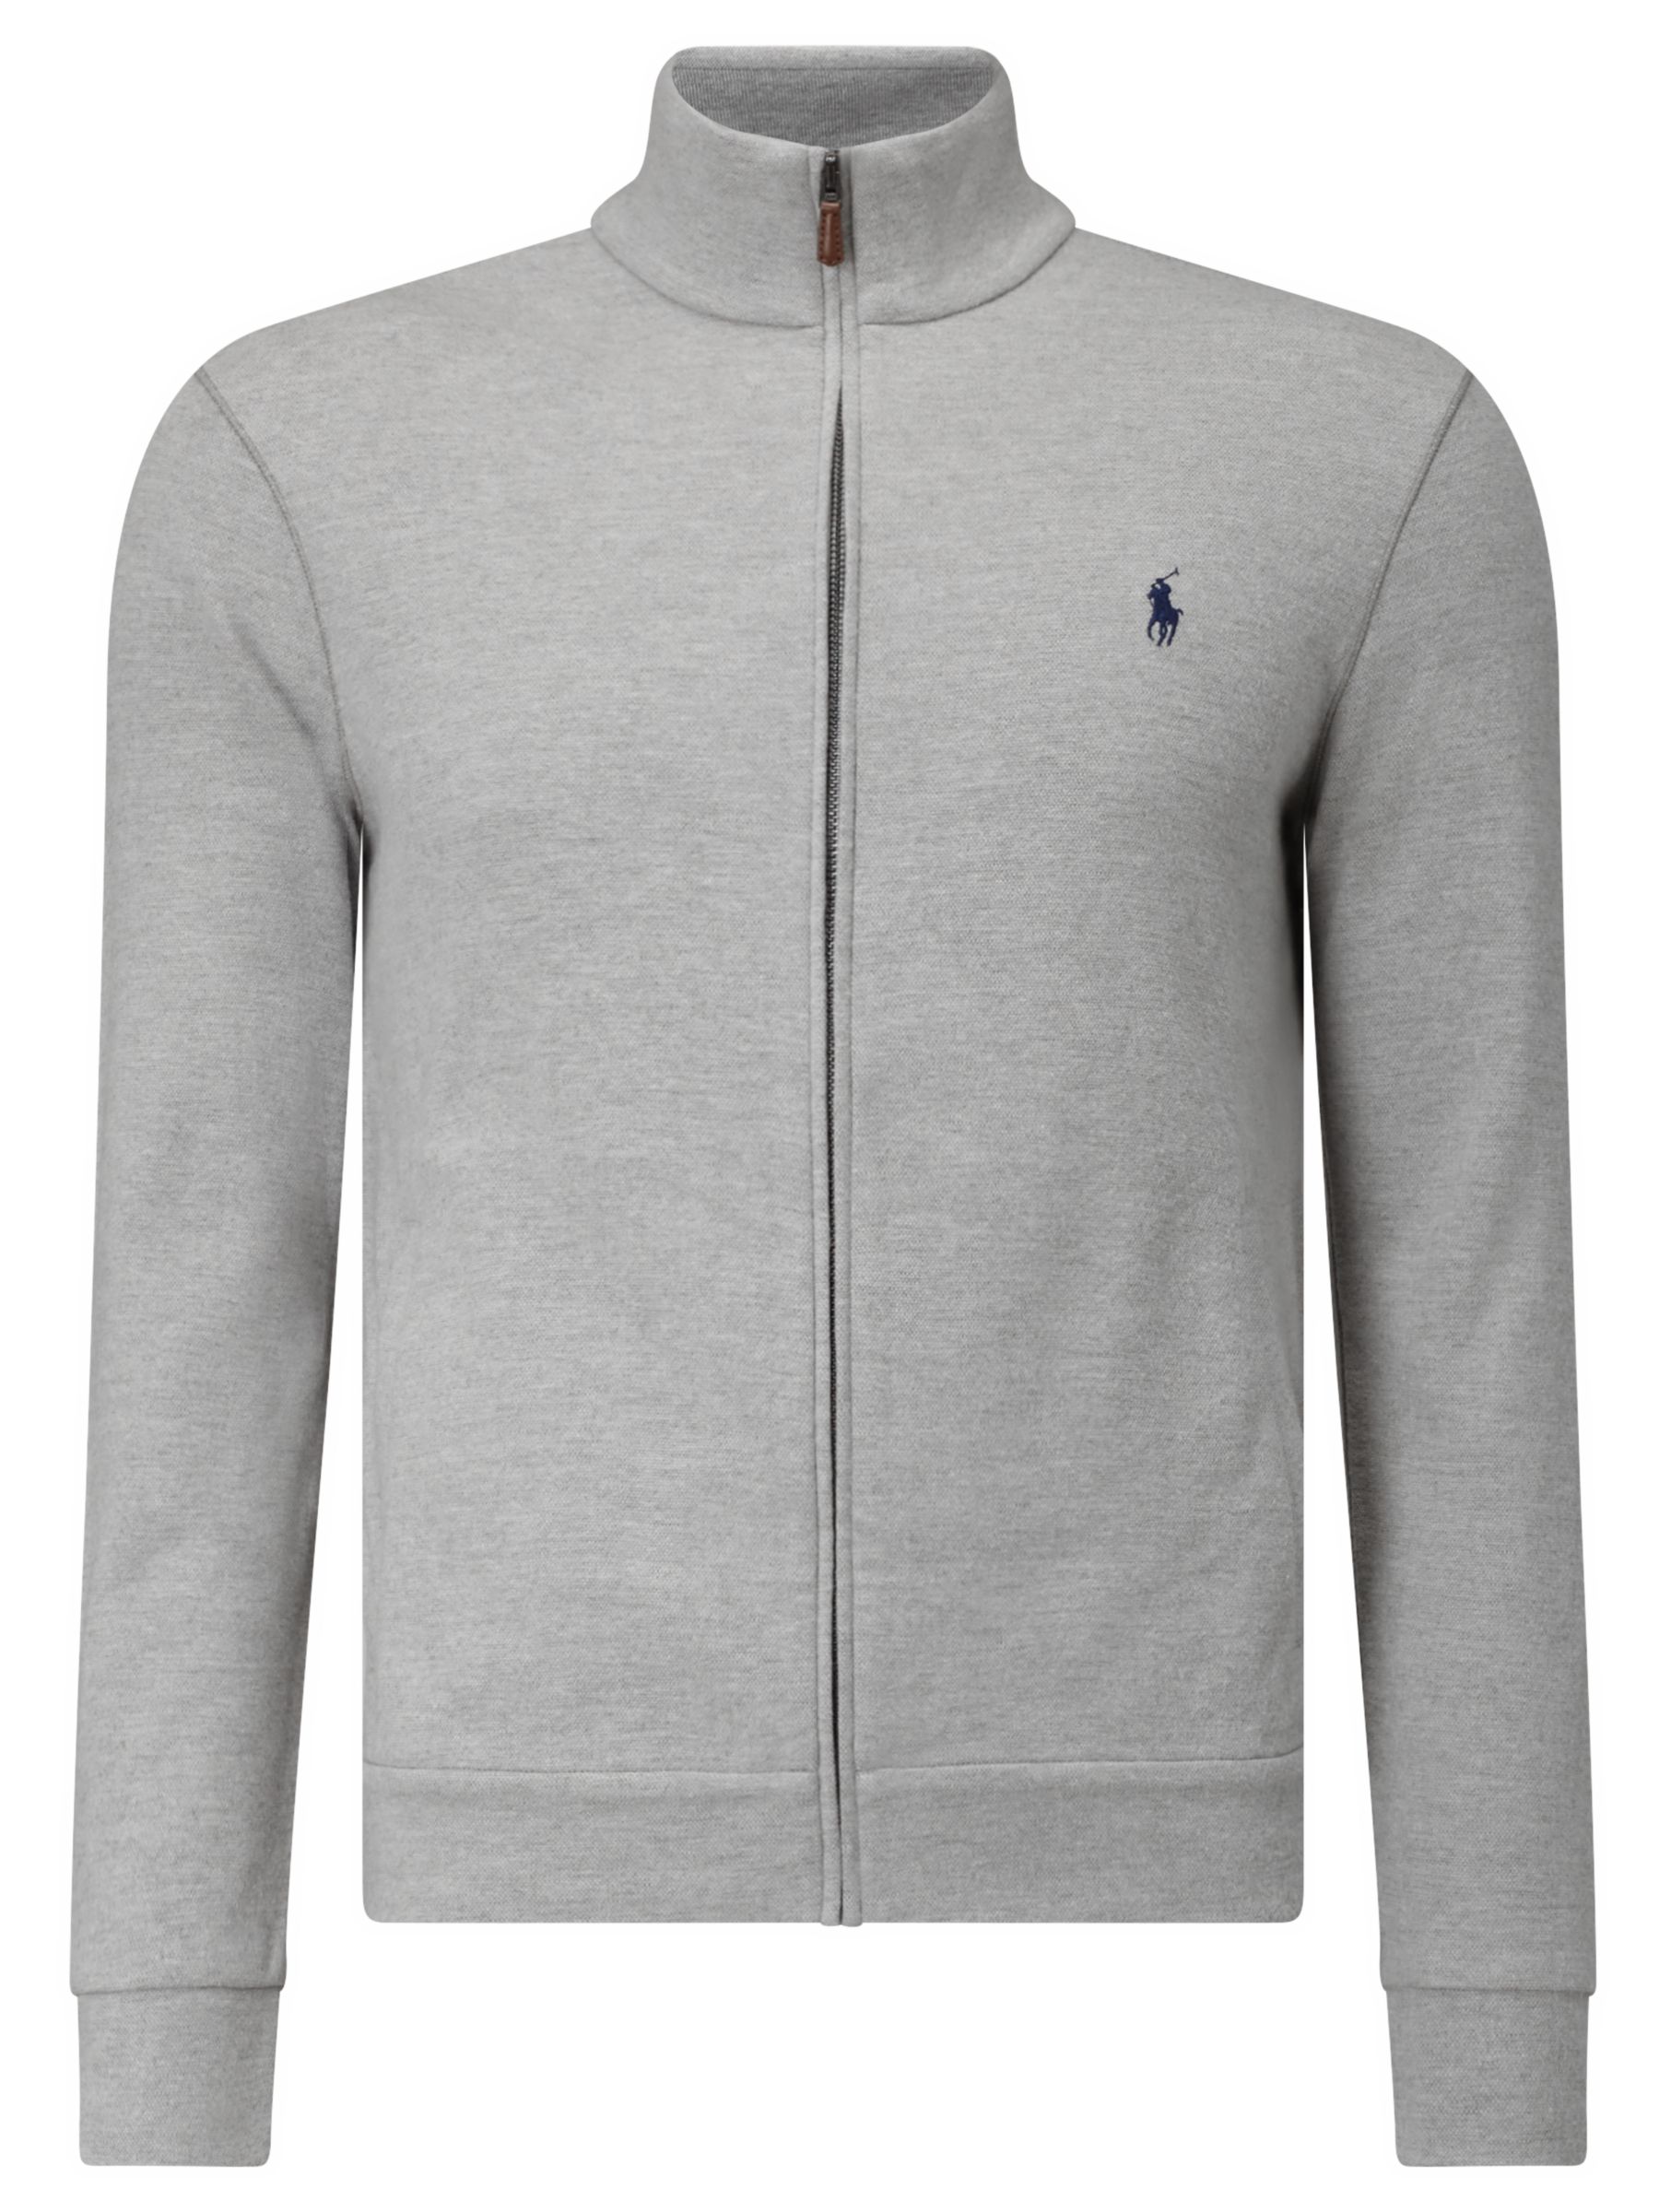 polo track top